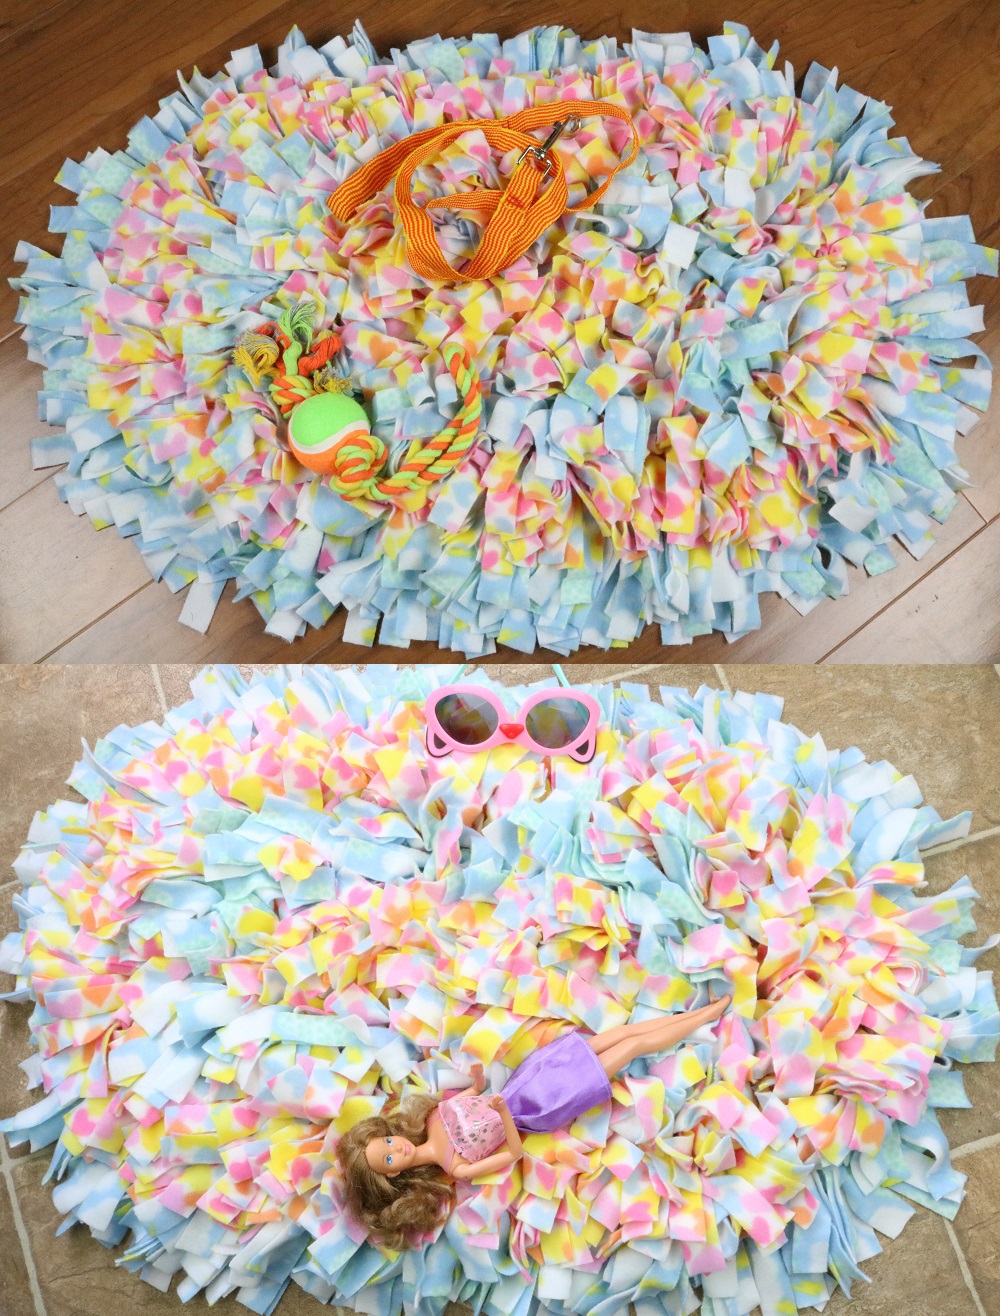 Top is a dog snuffle mat with leash on it bottom is a kids rug with doll on it